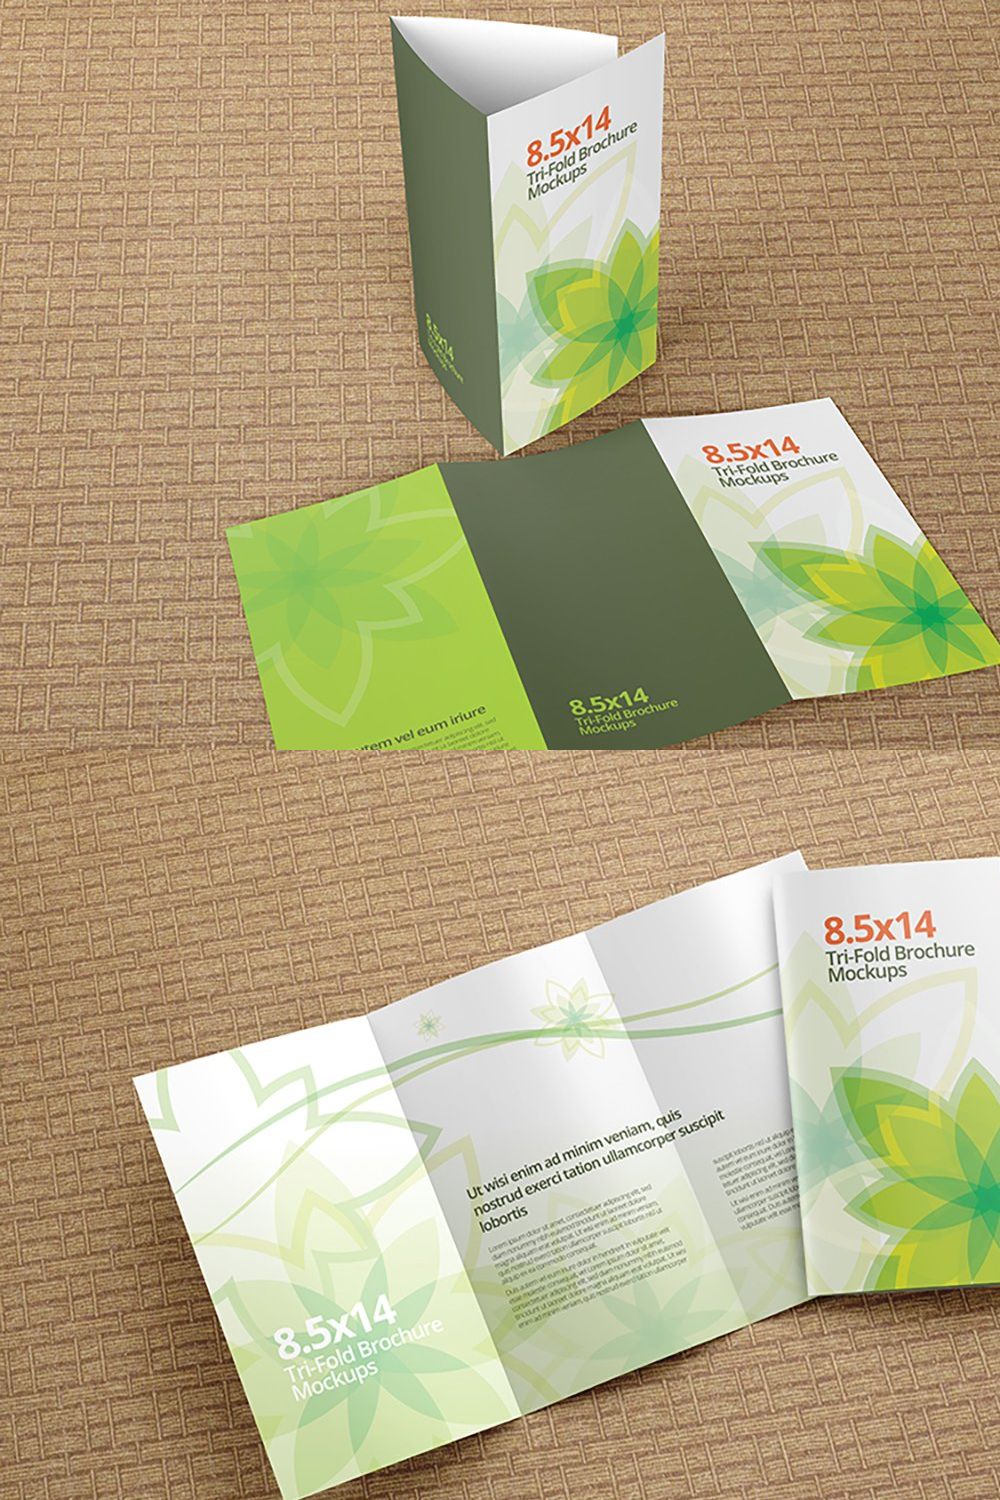 Trifold Brochure Mockups 8.5x14 size pinterest preview image.